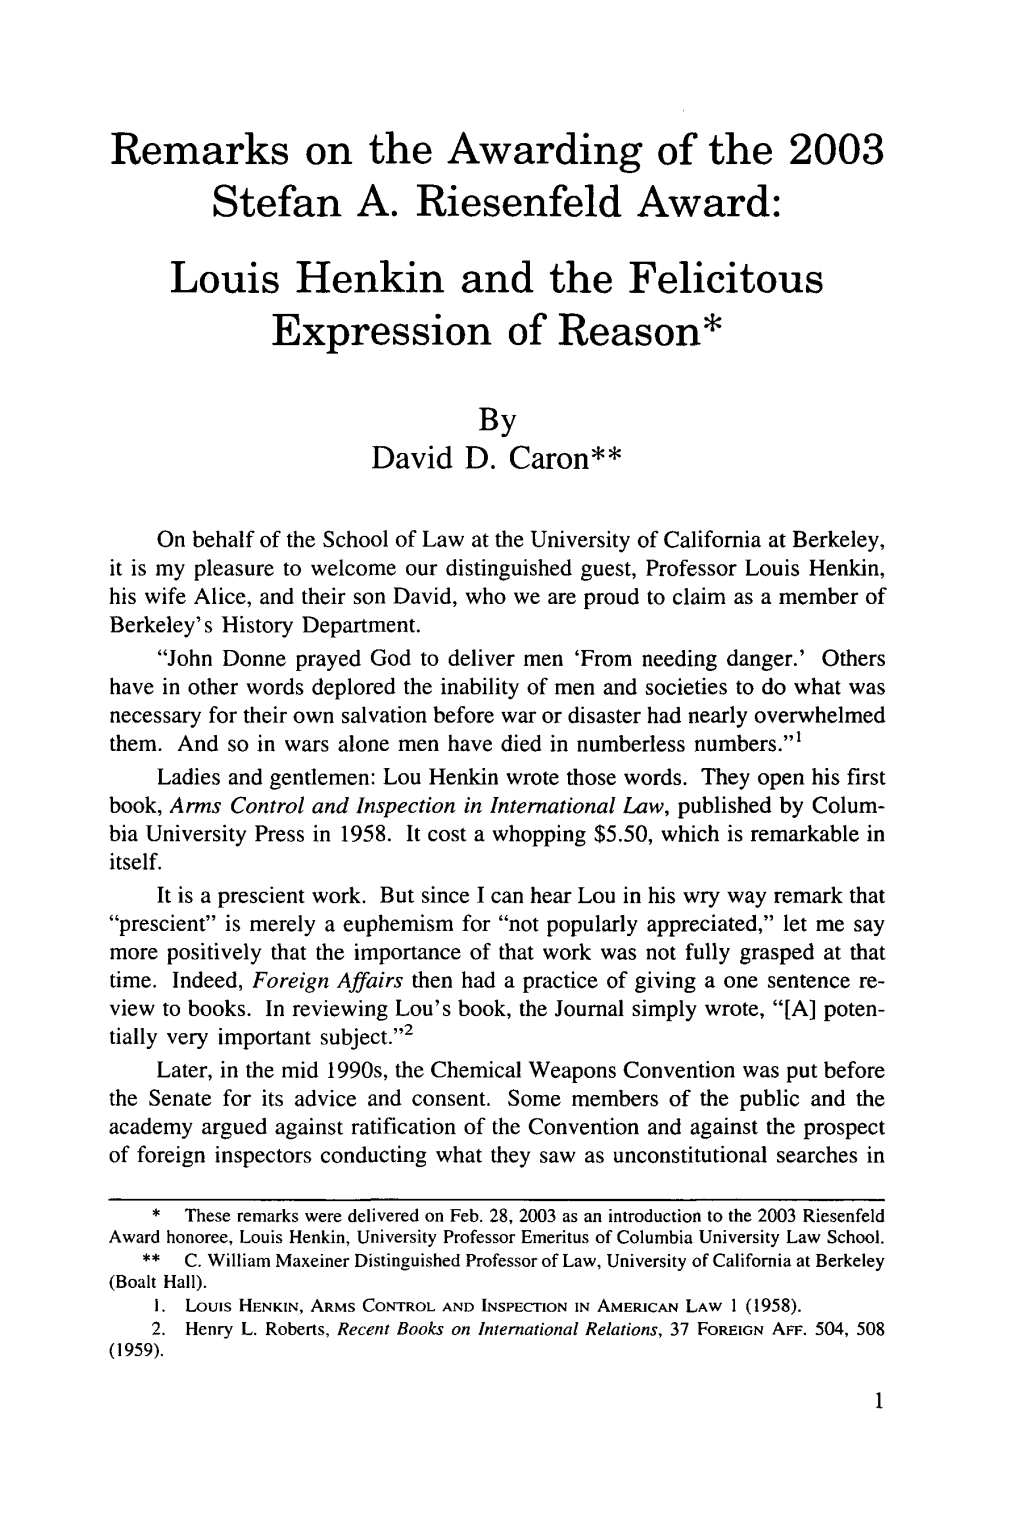 Louis Henkin and the Felicitous Expression of Reason*